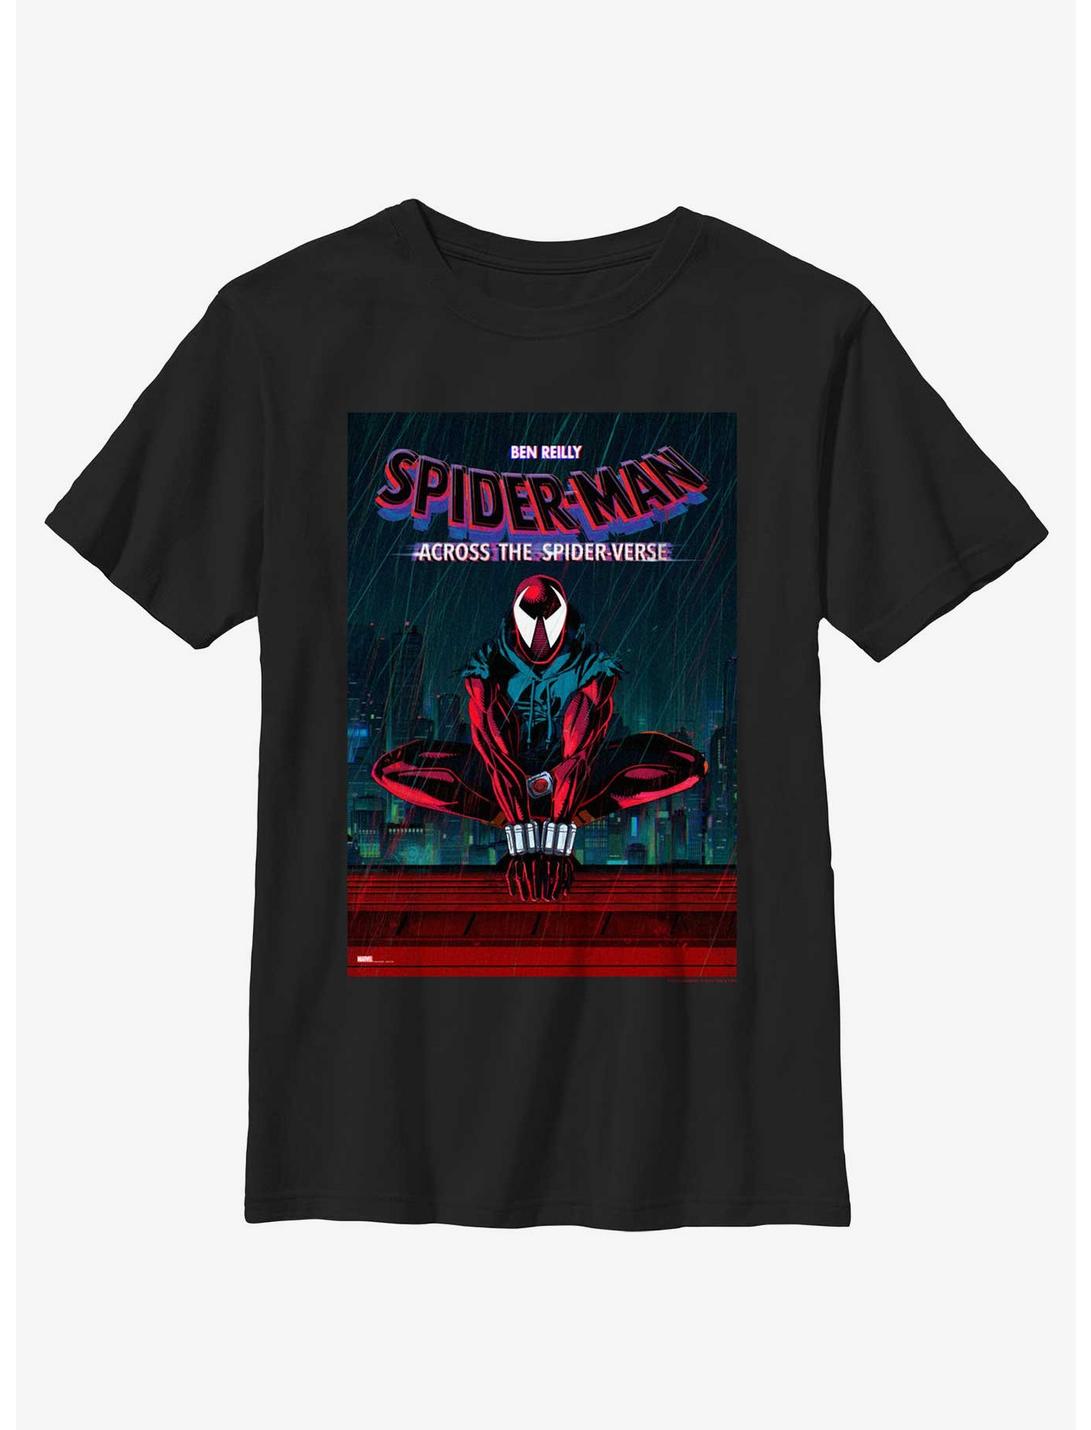 Spider-Man: Across The Spider-Verse Scarlet-Spider Poster Youth T-Shirt, BLACK, hi-res